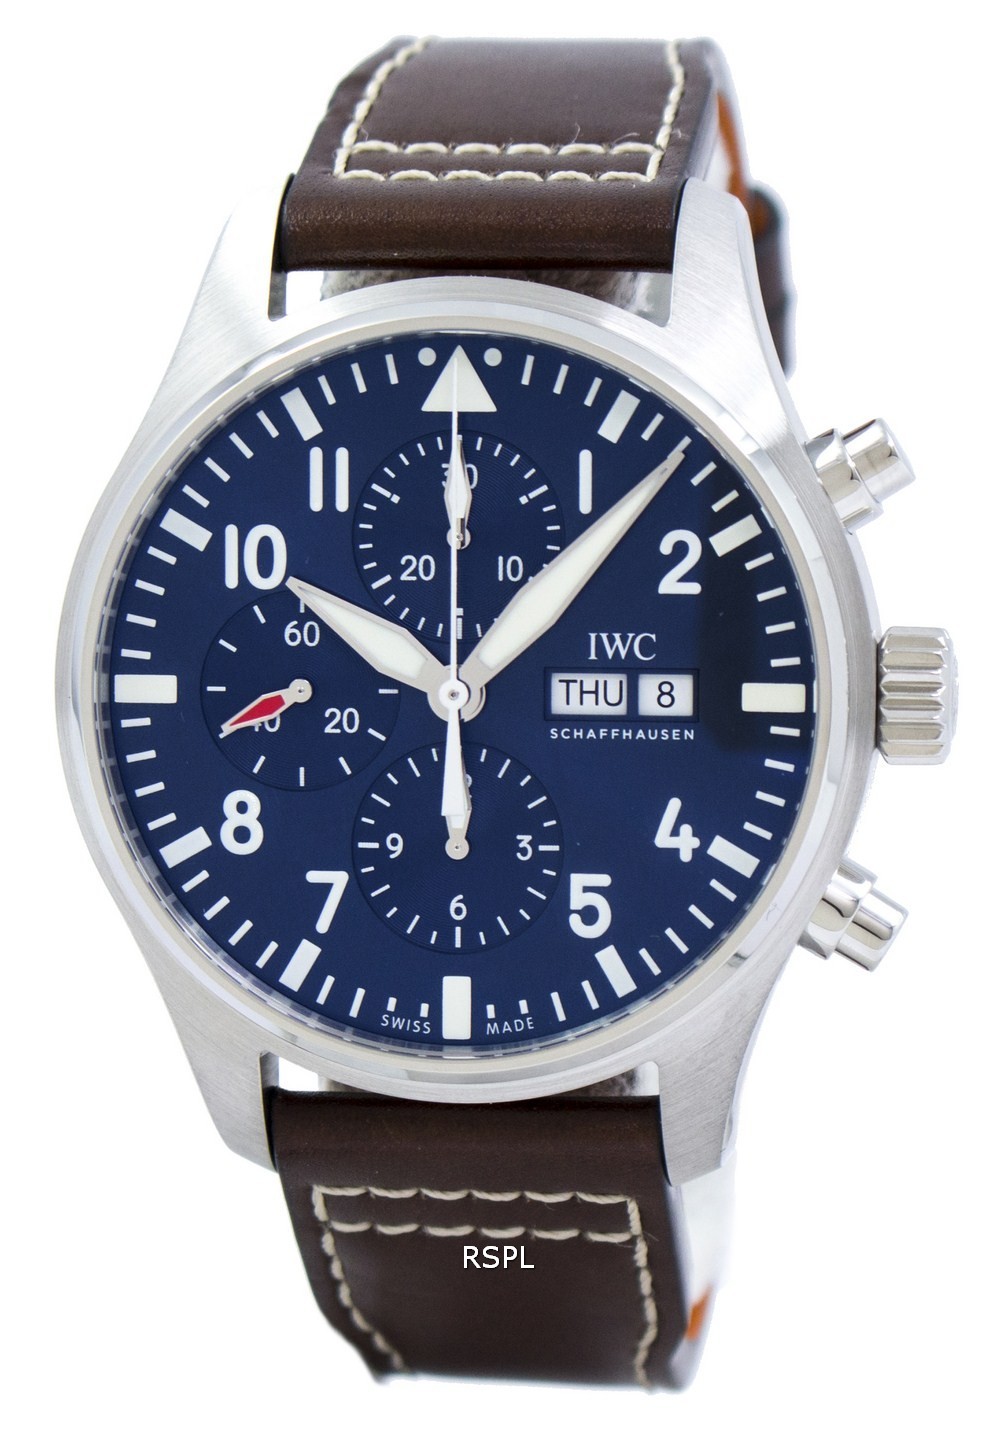 IWC Pilot’s “LE PETIT PRINCE” Edition Chronograph Automatic IW377714 Men’s Watch.jpg  by zetawatches